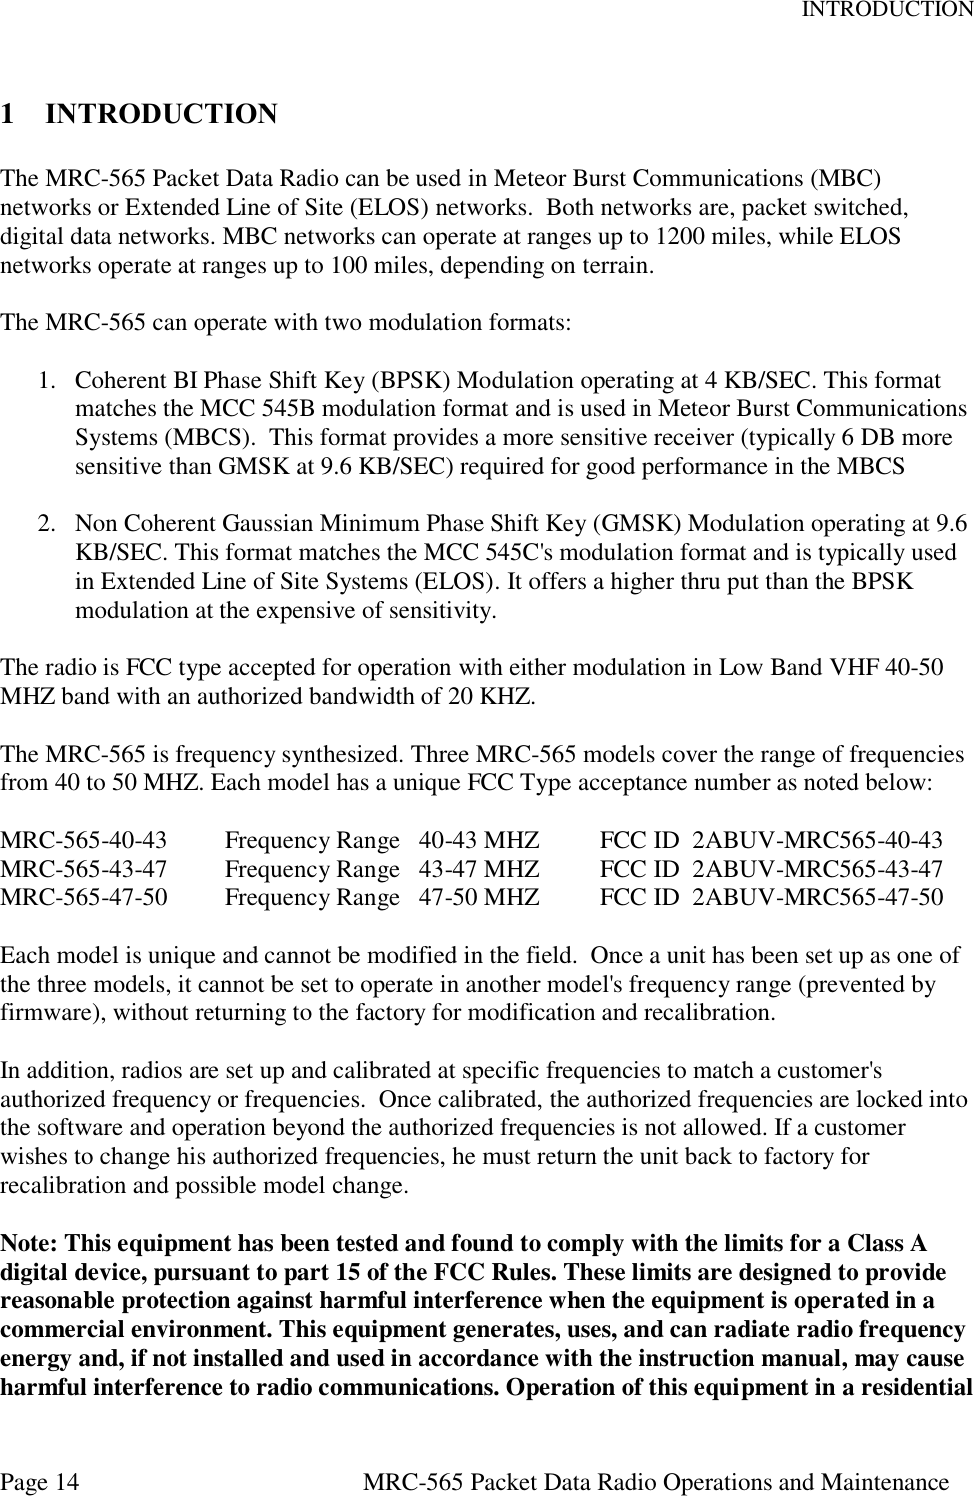 INTRODUCTION Page 14  MRC-565 Packet Data Radio Operations and Maintenance 1 INTRODUCTION  The MRC-565 Packet Data Radio can be used in Meteor Burst Communications (MBC) networks or Extended Line of Site (ELOS) networks.  Both networks are, packet switched, digital data networks. MBC networks can operate at ranges up to 1200 miles, while ELOS networks operate at ranges up to 100 miles, depending on terrain.   The MRC-565 can operate with two modulation formats:  1. Coherent BI Phase Shift Key (BPSK) Modulation operating at 4 KB/SEC. This format matches the MCC 545B modulation format and is used in Meteor Burst Communications Systems (MBCS).  This format provides a more sensitive receiver (typically 6 DB more sensitive than GMSK at 9.6 KB/SEC) required for good performance in the MBCS  2. Non Coherent Gaussian Minimum Phase Shift Key (GMSK) Modulation operating at 9.6 KB/SEC. This format matches the MCC 545C&apos;s modulation format and is typically used in Extended Line of Site Systems (ELOS). It offers a higher thru put than the BPSK modulation at the expensive of sensitivity.  The radio is FCC type accepted for operation with either modulation in Low Band VHF 40-50 MHZ band with an authorized bandwidth of 20 KHZ.  The MRC-565 is frequency synthesized. Three MRC-565 models cover the range of frequencies from 40 to 50 MHZ. Each model has a unique FCC Type acceptance number as noted below:  MRC-565-40-43  Frequency Range   40-43 MHZ  FCC ID  2ABUV-MRC565-40-43 MRC-565-43-47  Frequency Range   43-47 MHZ  FCC ID  2ABUV-MRC565-43-47 MRC-565-47-50  Frequency Range   47-50 MHZ  FCC ID  2ABUV-MRC565-47-50  Each model is unique and cannot be modified in the field.  Once a unit has been set up as one of the three models, it cannot be set to operate in another model&apos;s frequency range (prevented by firmware), without returning to the factory for modification and recalibration.  In addition, radios are set up and calibrated at specific frequencies to match a customer&apos;s authorized frequency or frequencies.  Once calibrated, the authorized frequencies are locked into the software and operation beyond the authorized frequencies is not allowed. If a customer wishes to change his authorized frequencies, he must return the unit back to factory for recalibration and possible model change.   Note: This equipment has been tested and found to comply with the limits for a Class A digital device, pursuant to part 15 of the FCC Rules. These limits are designed to provide reasonable protection against harmful interference when the equipment is operated in a commercial environment. This equipment generates, uses, and can radiate radio frequency energy and, if not installed and used in accordance with the instruction manual, may cause harmful interference to radio communications. Operation of this equipment in a residential 